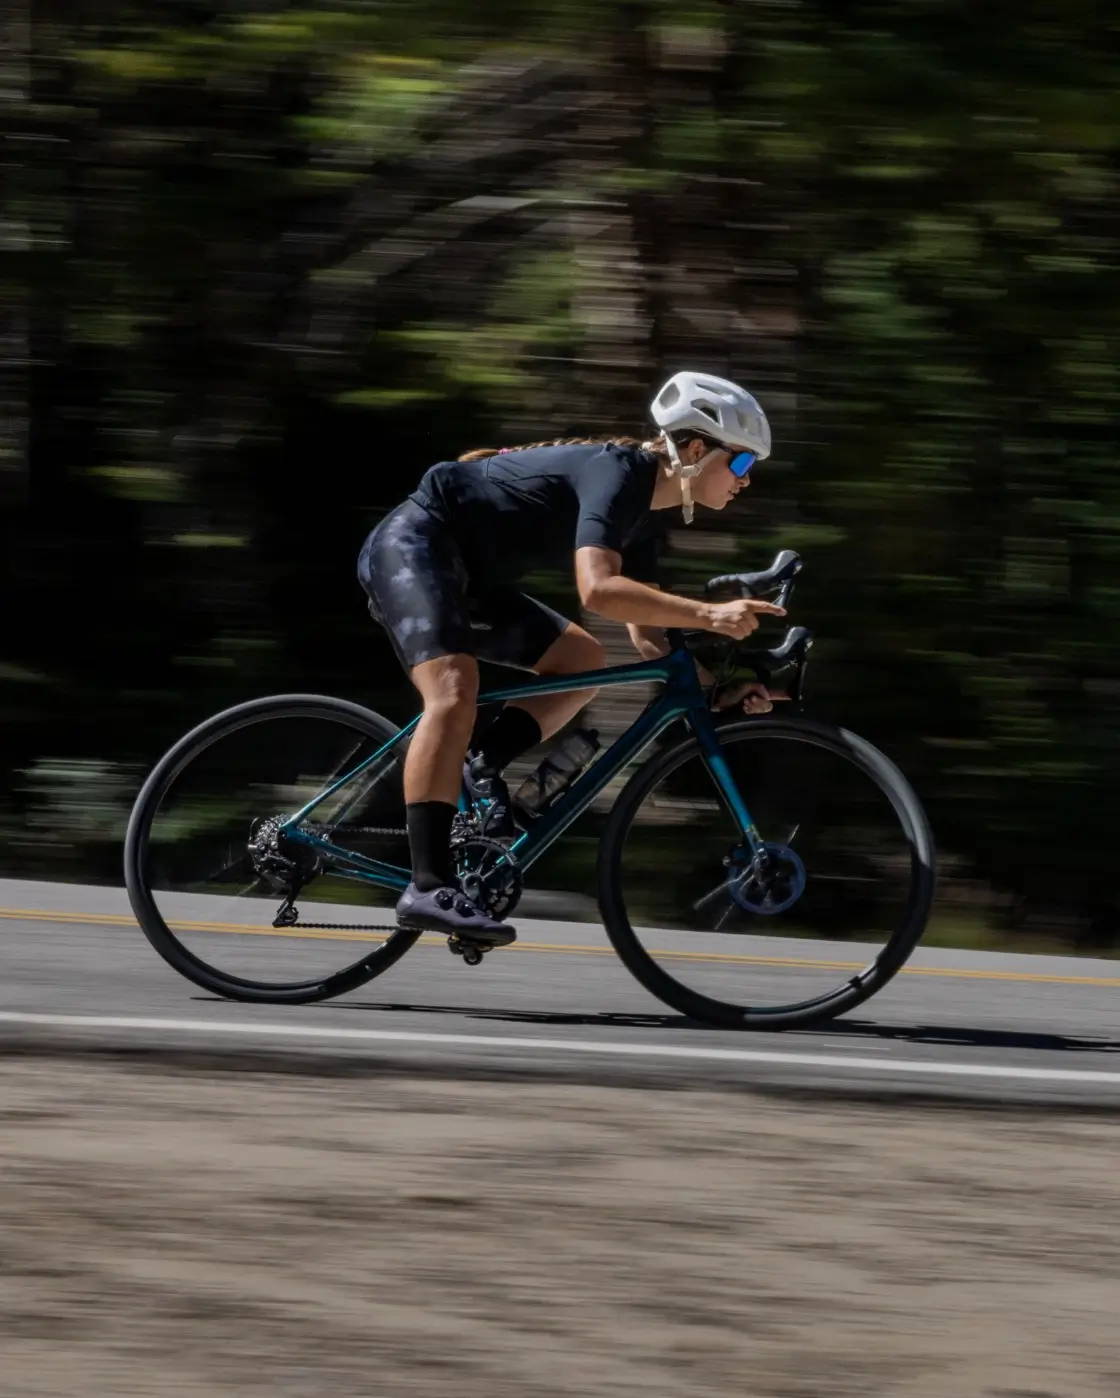 Female road cyclist riding fast down a road wearing PERL iZUMi cycling apparel